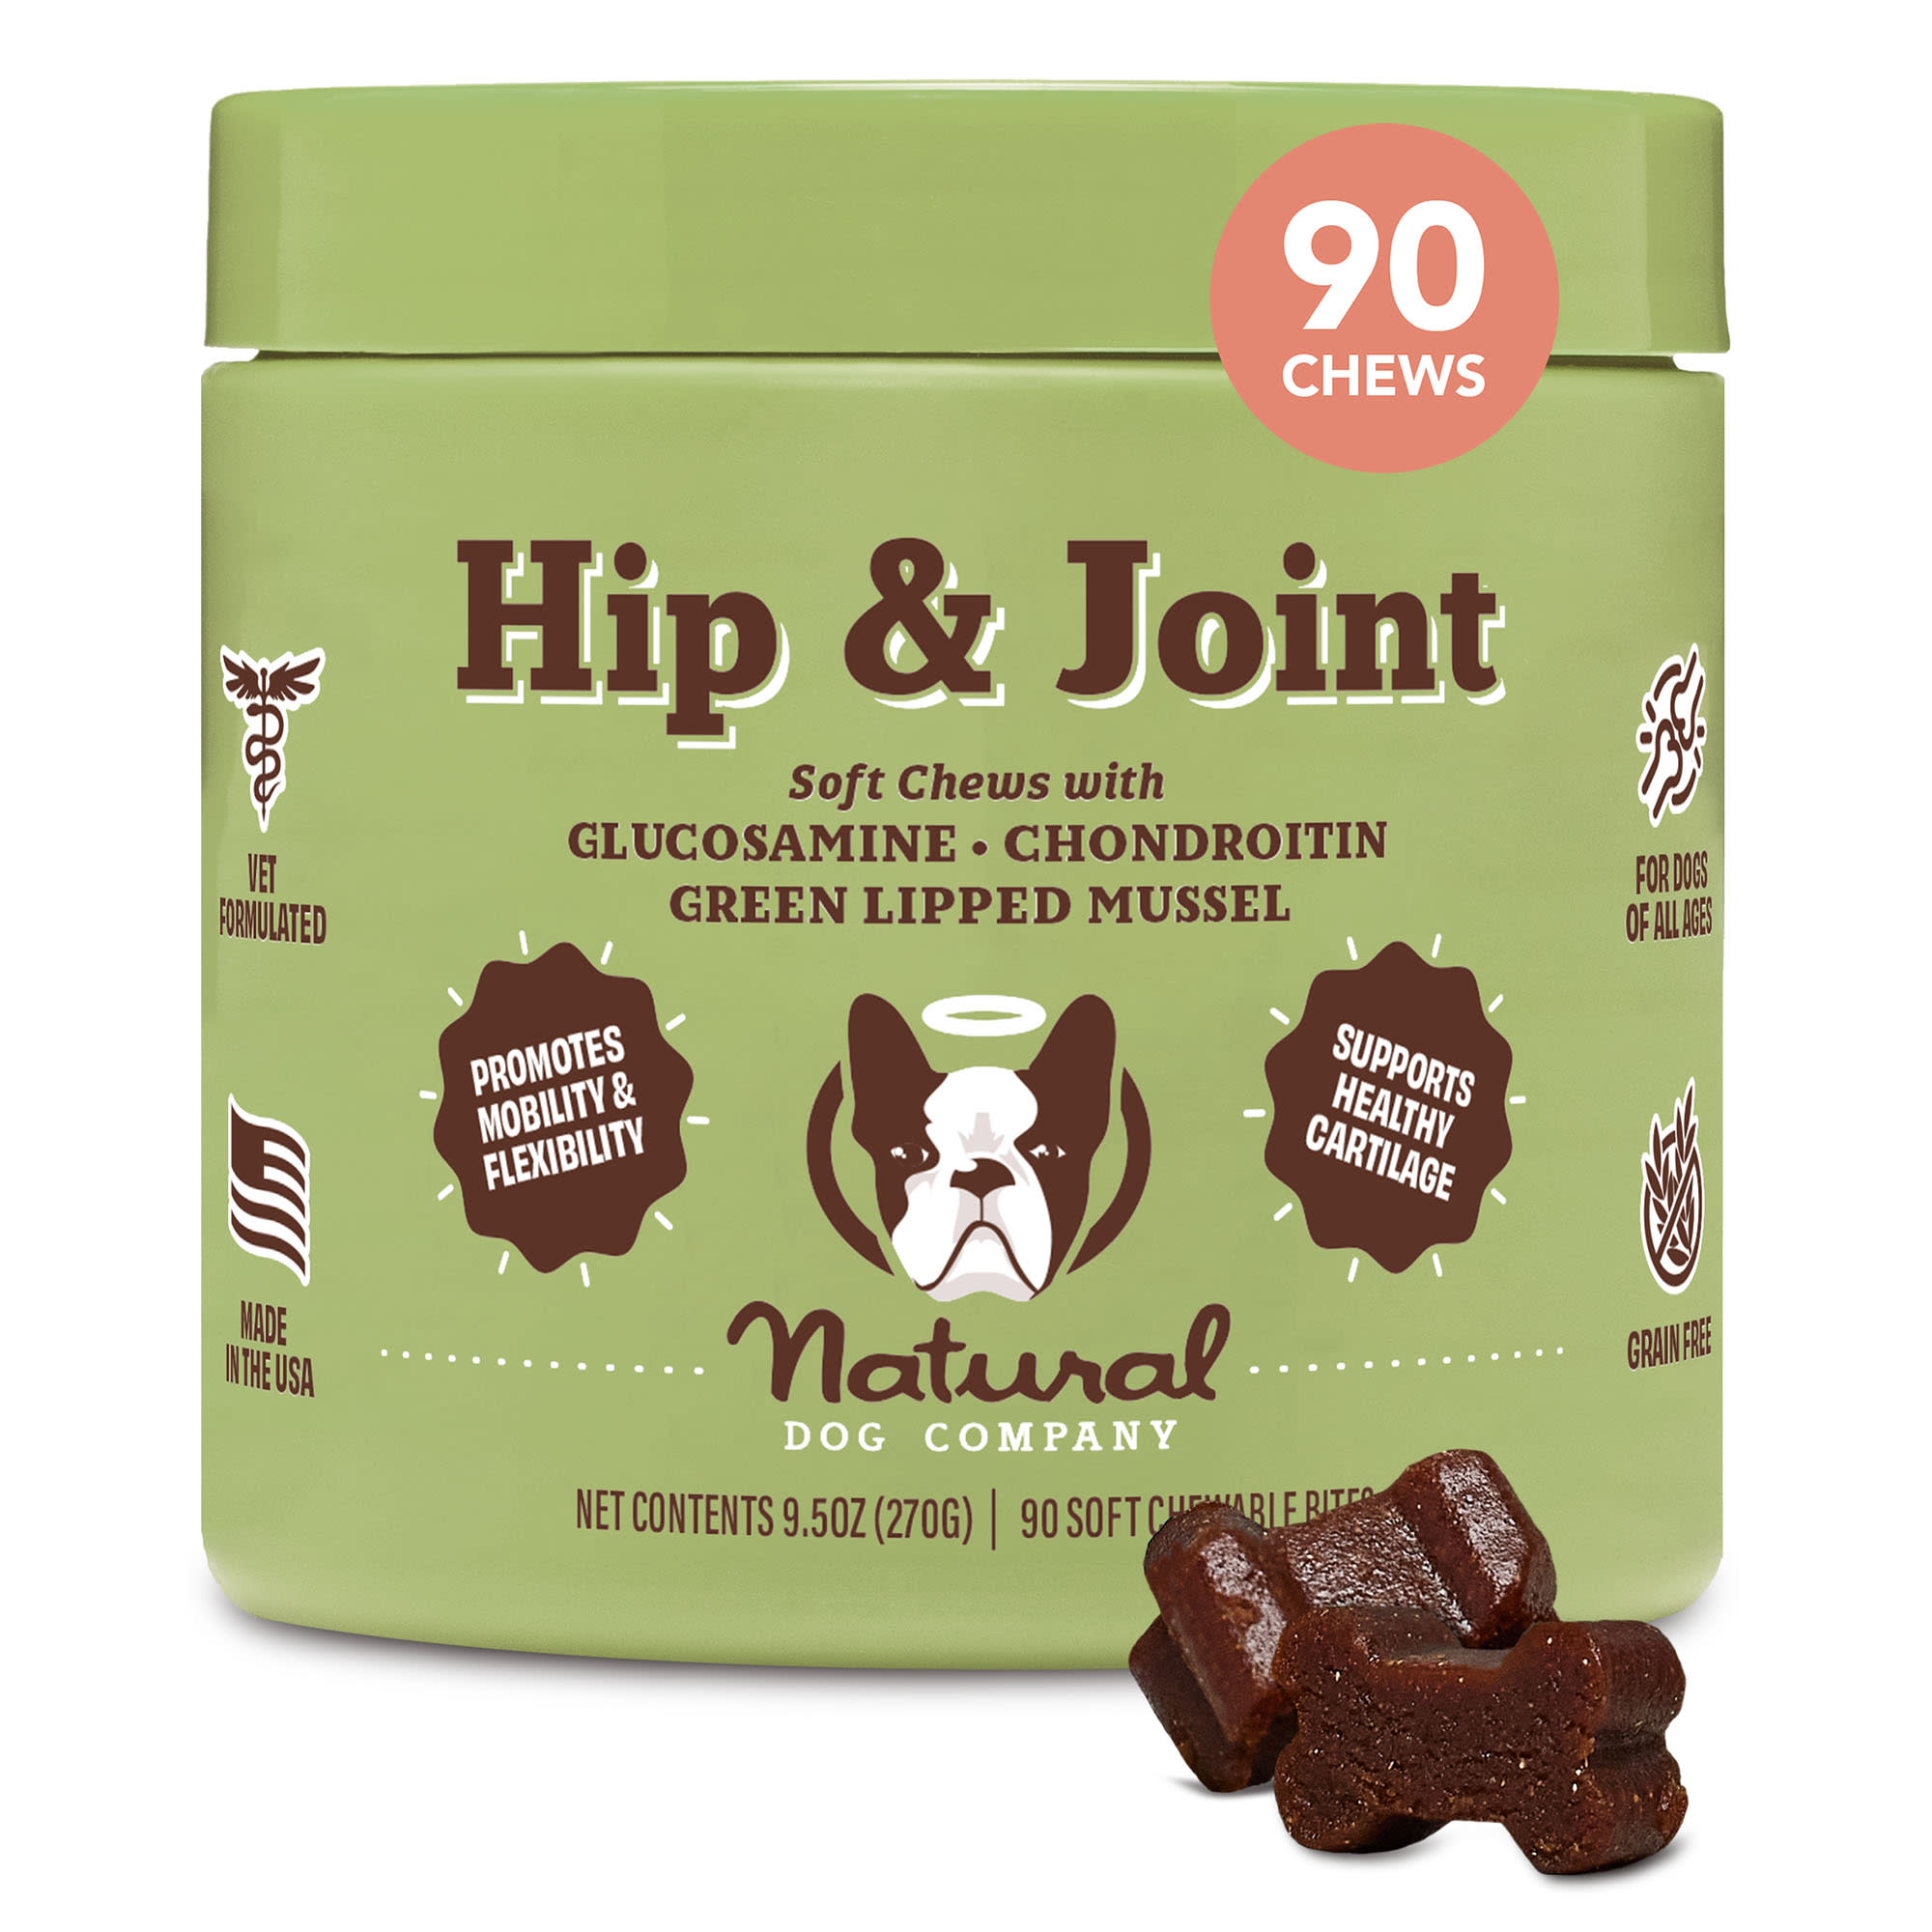 Natural Dog Company Hip and Joint Chews for Dogs, 10 oz., Count of 90 ...